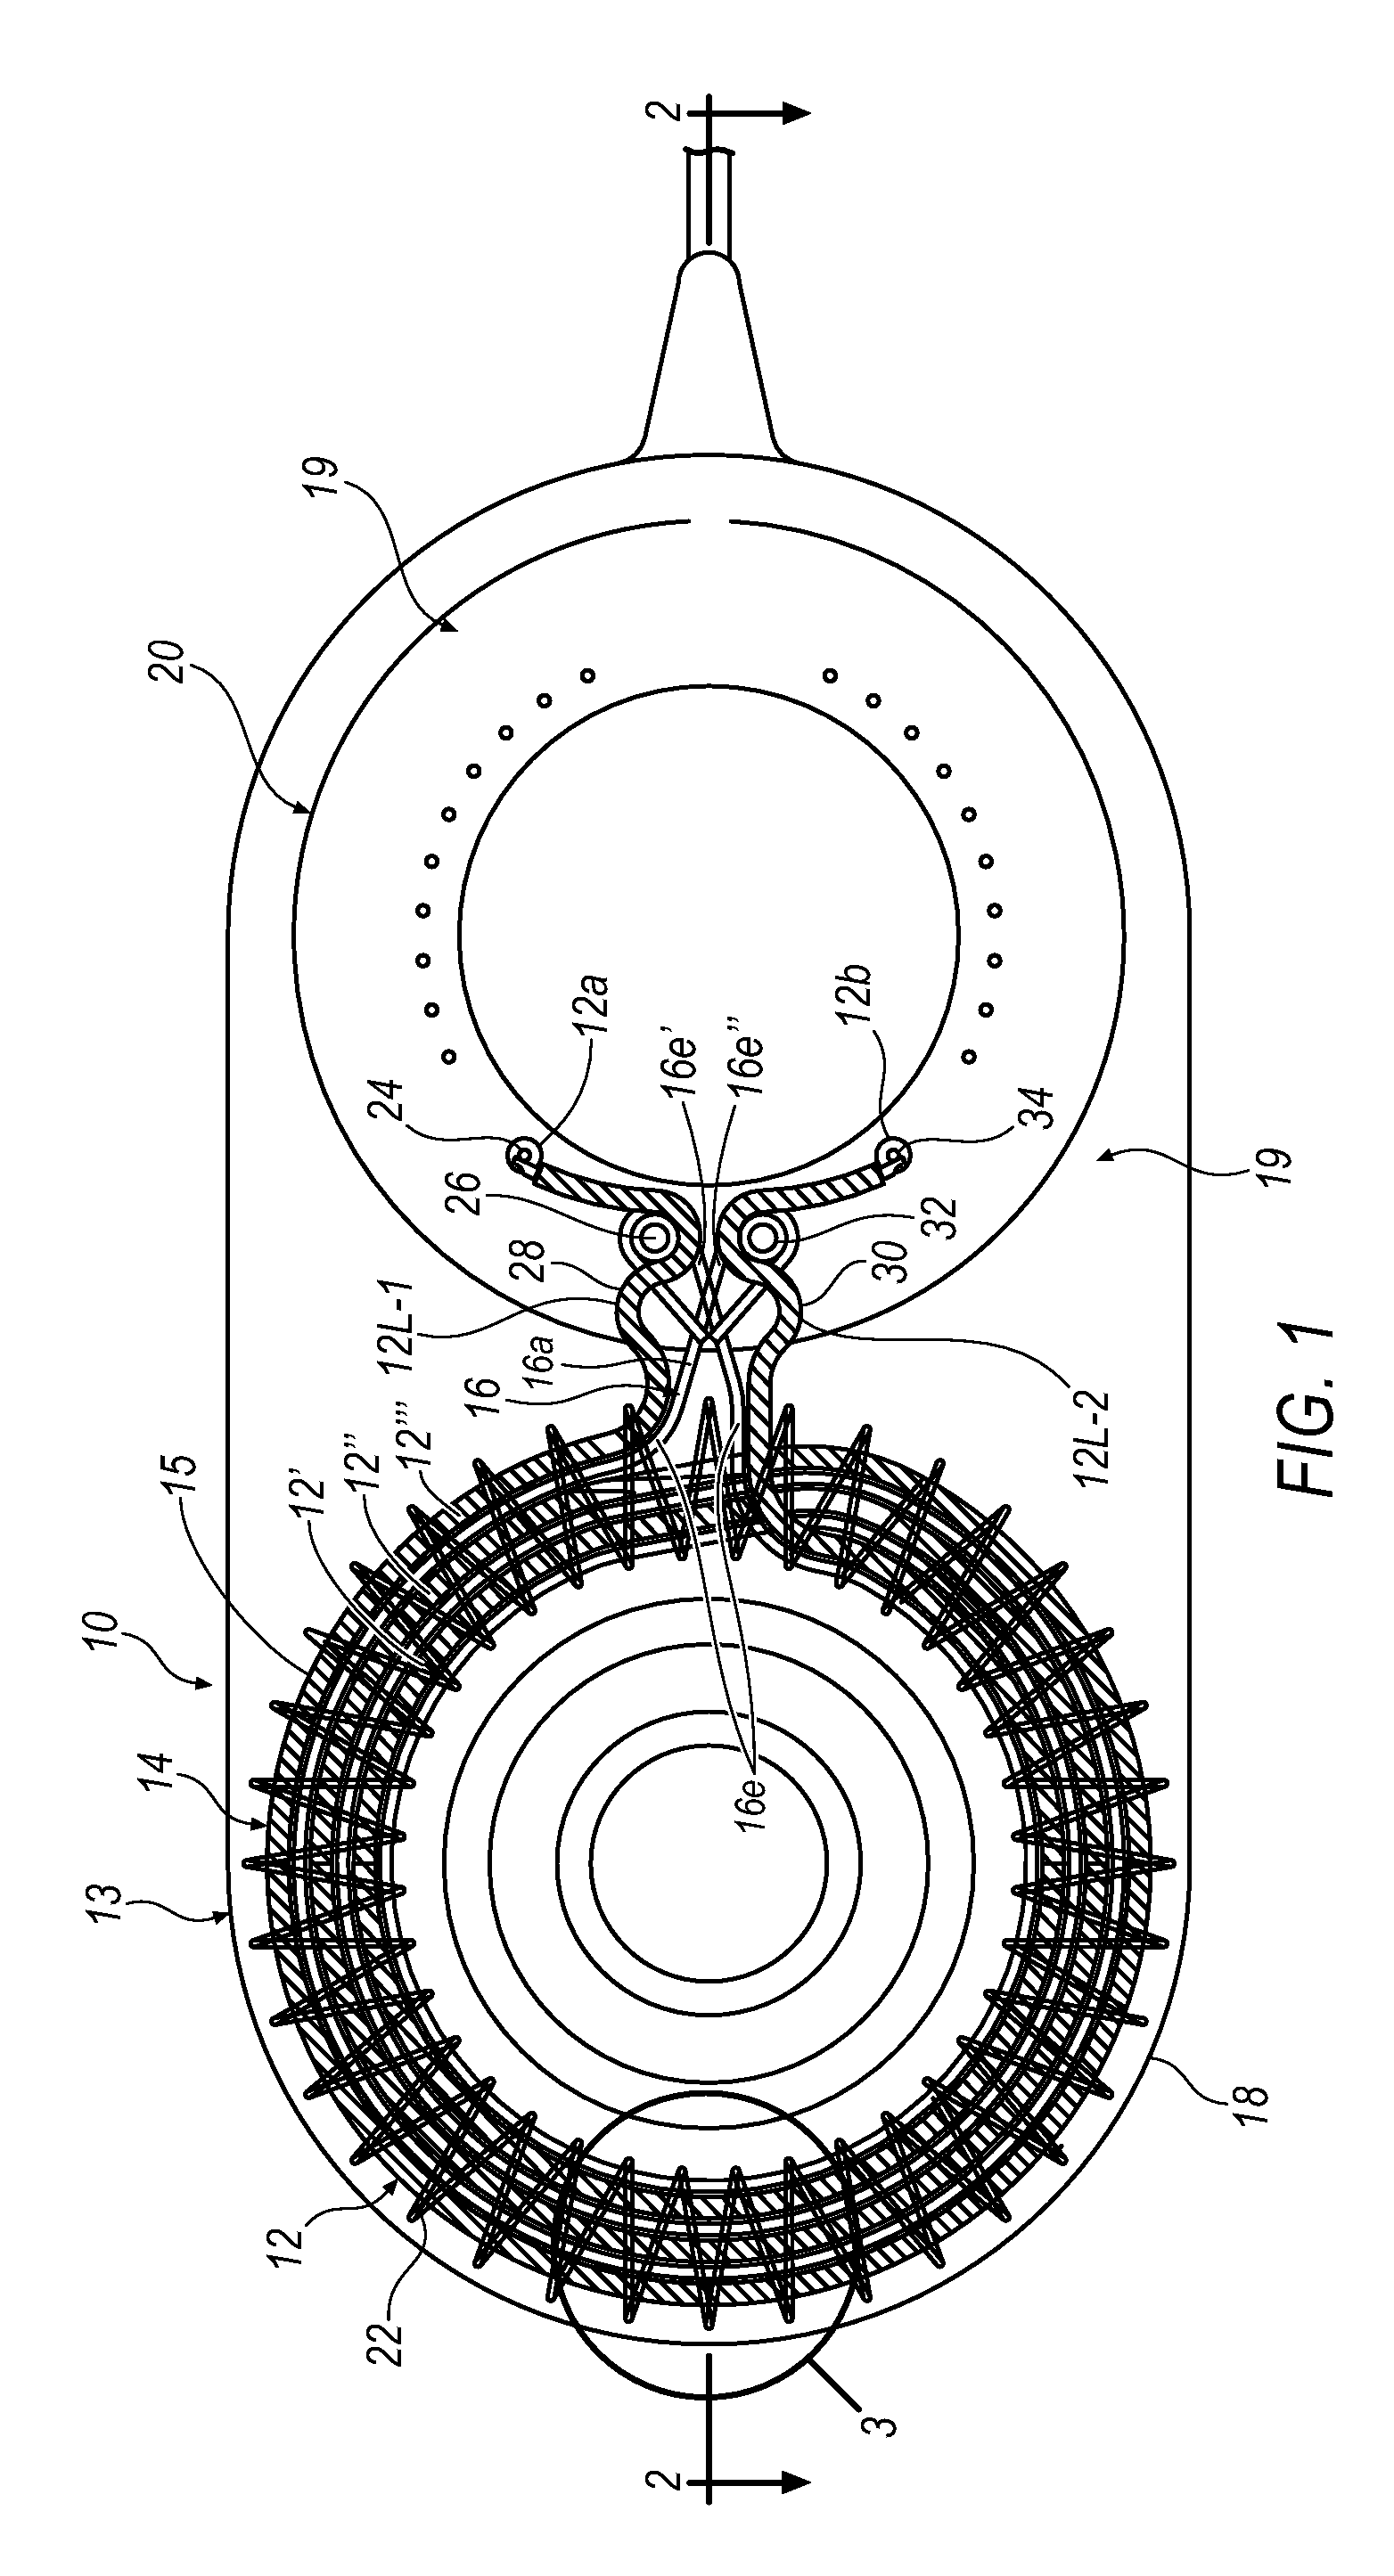 Impact resistant implantable antenna coil assembly